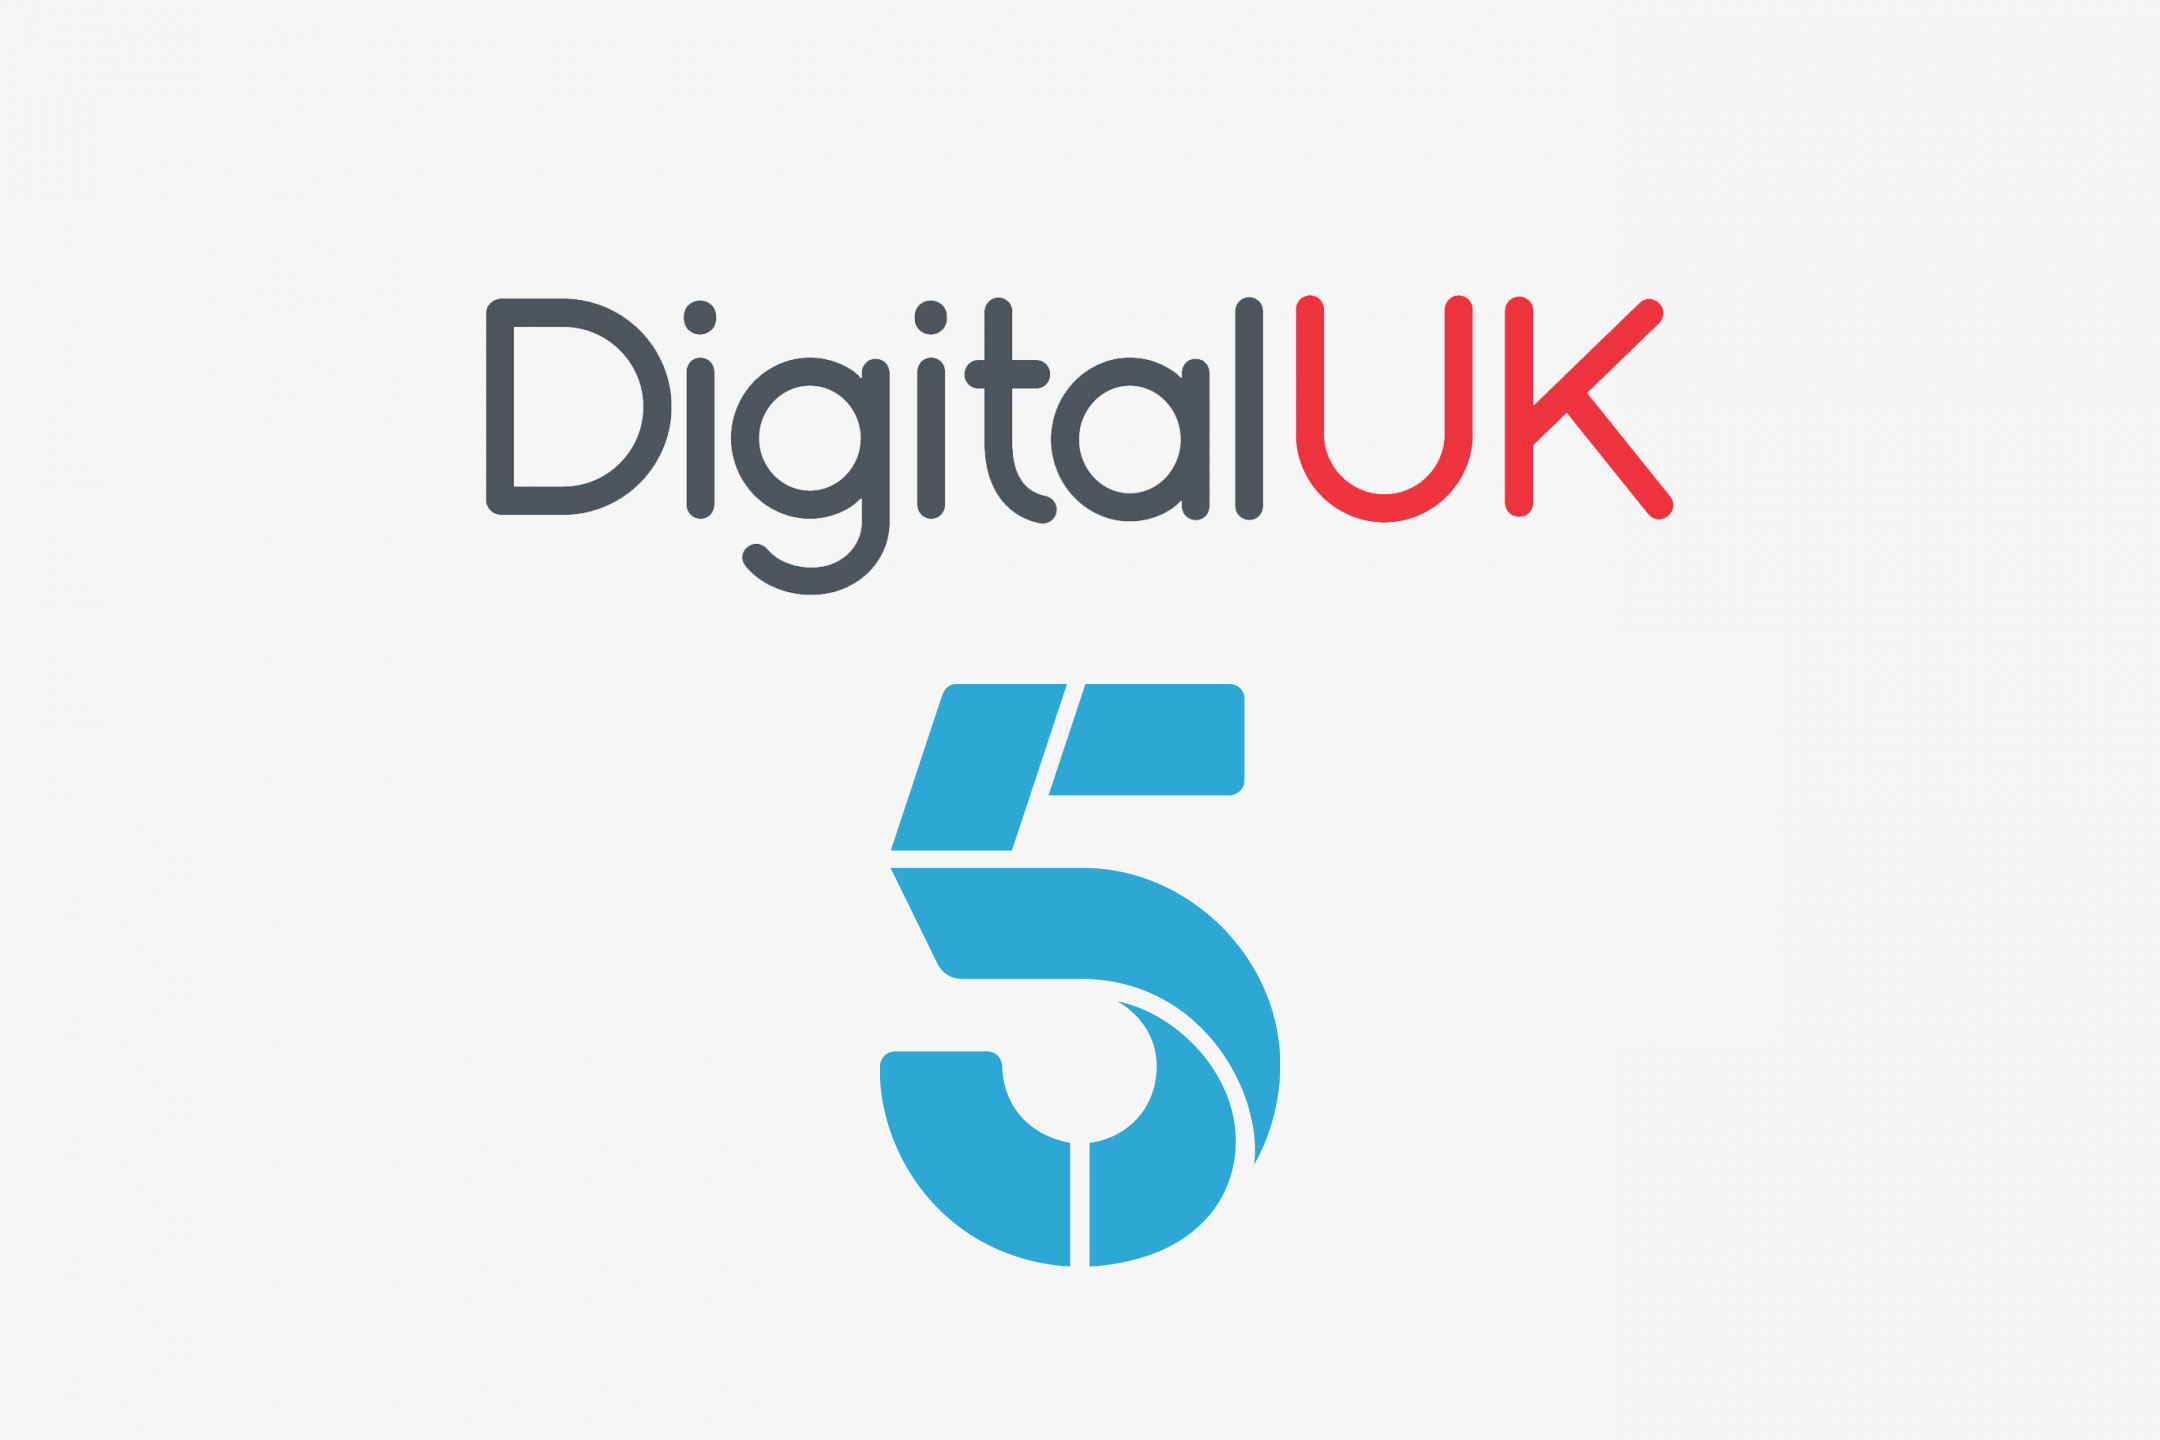 Digital UK and Channel 5 logos